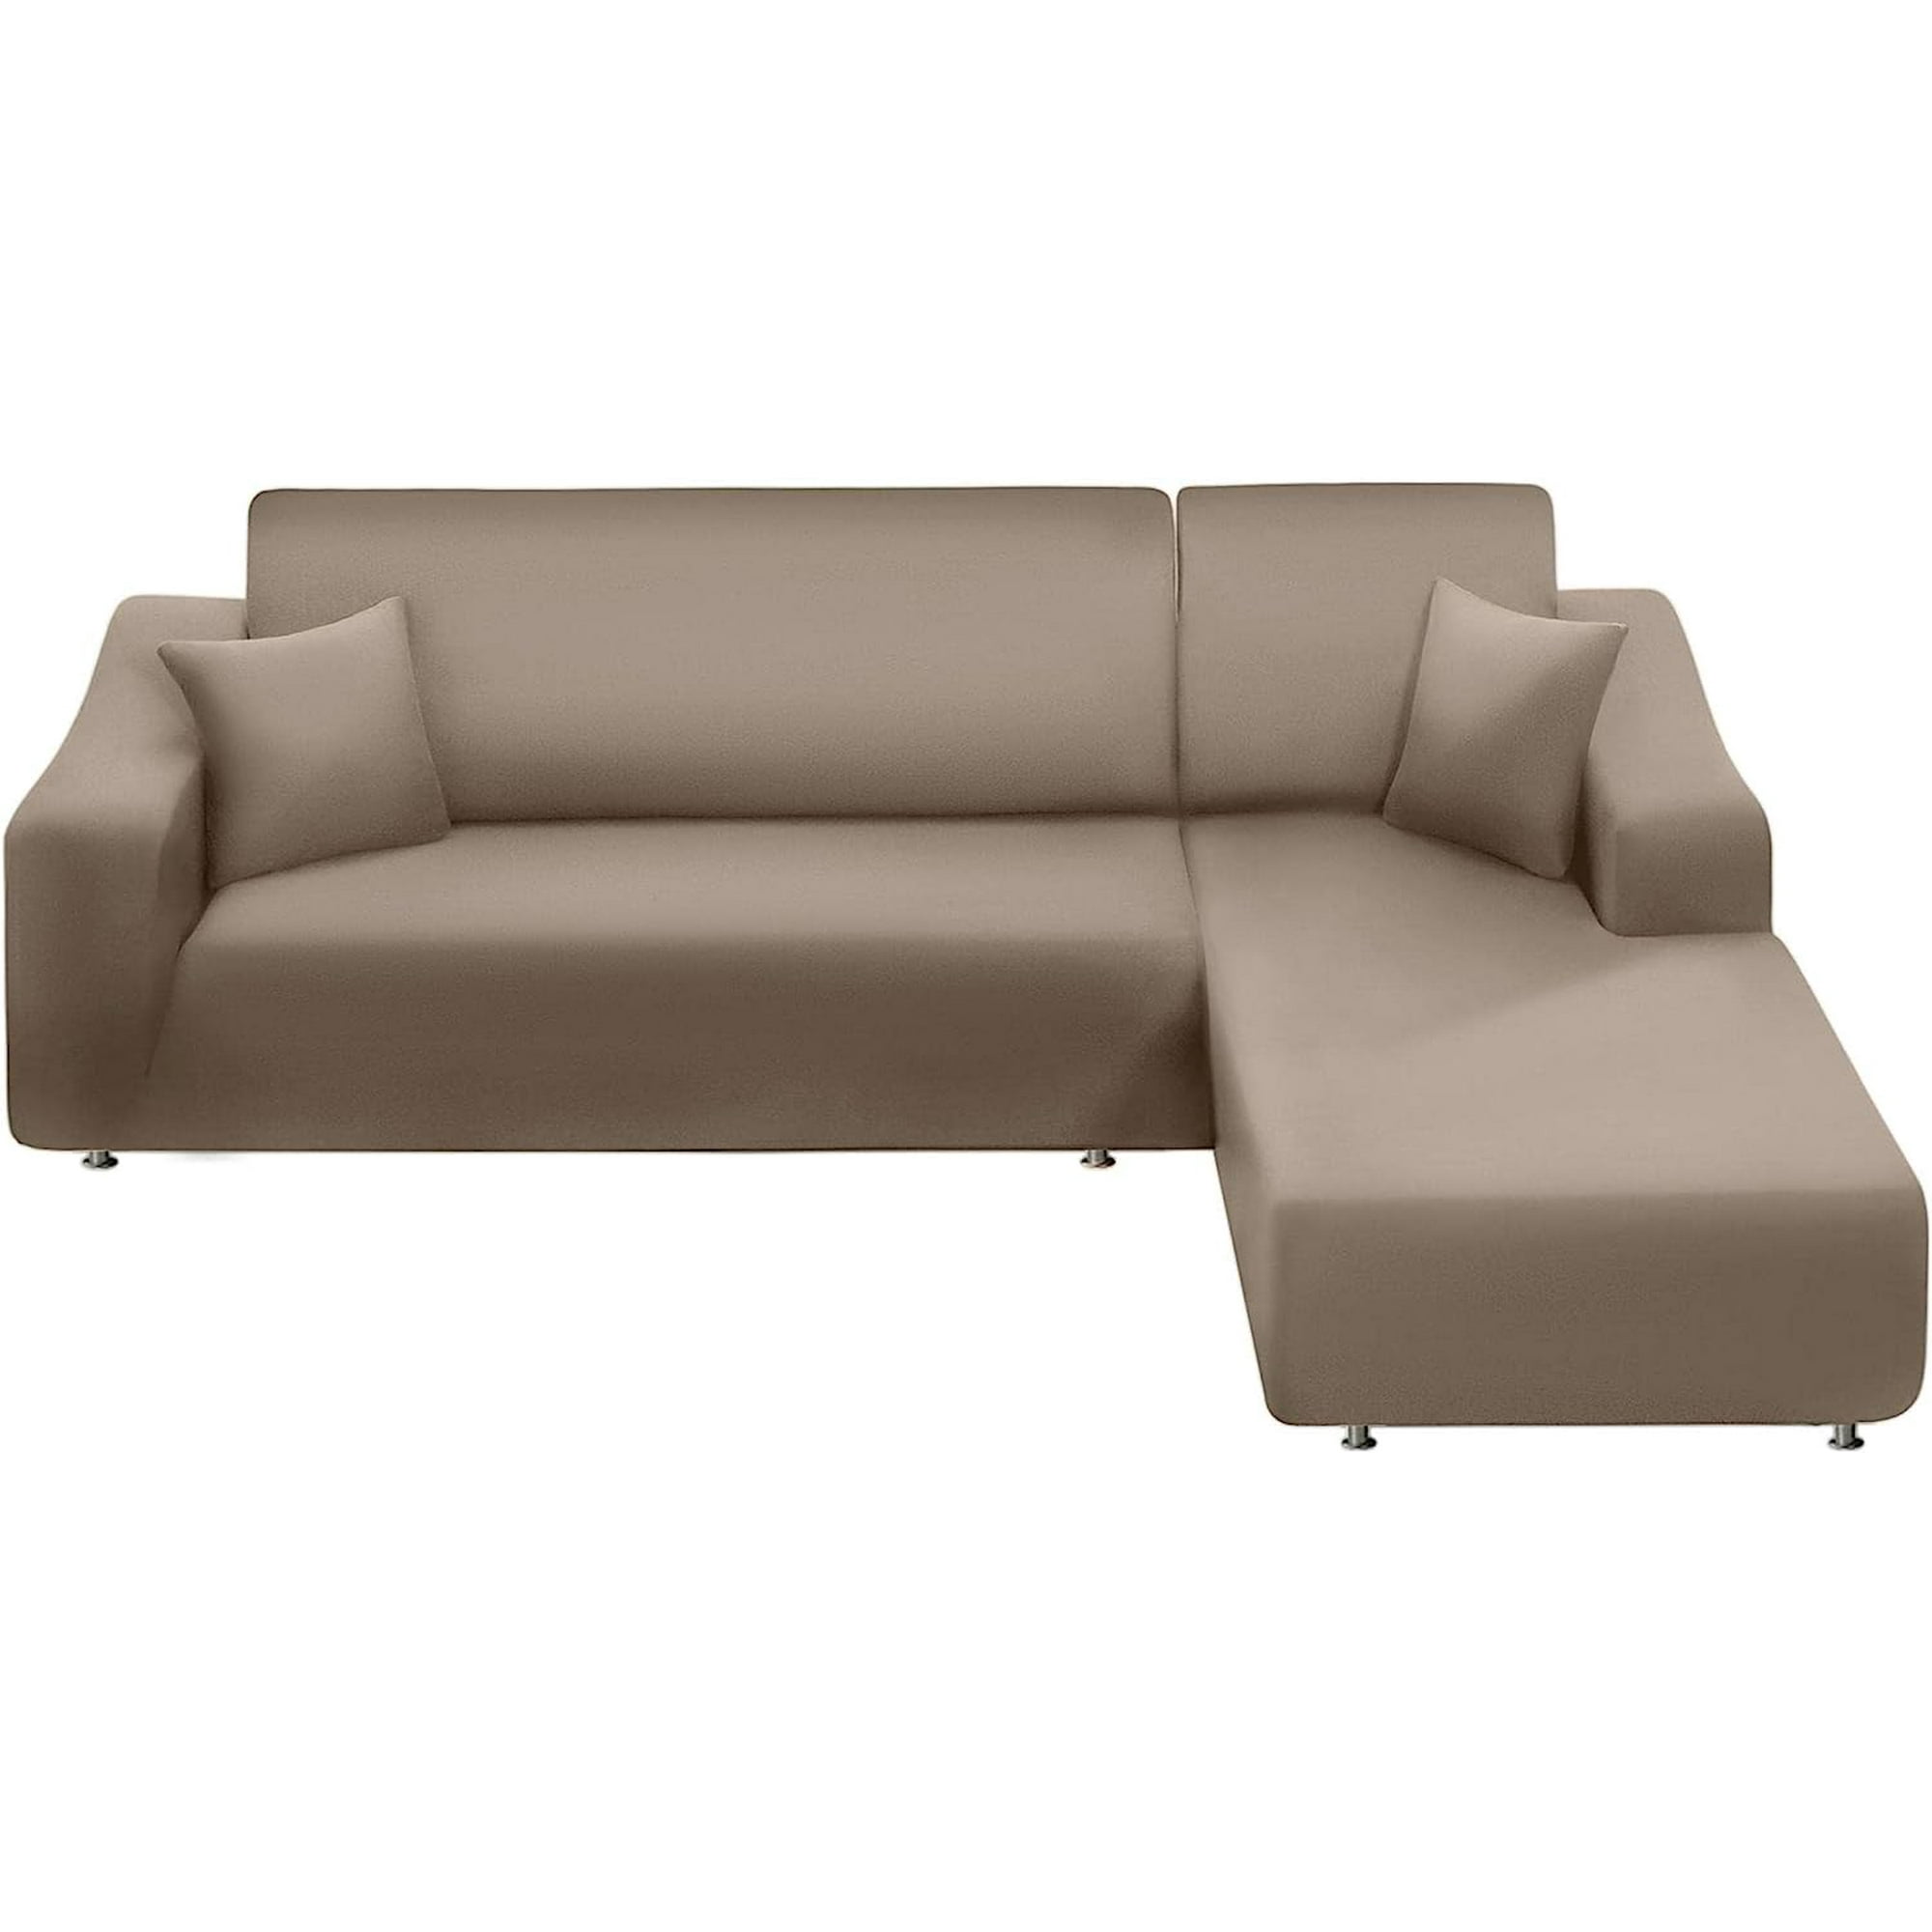 NAISI Sectional Couch Cover L Shape 2 Pieces Sofa Cover Soft